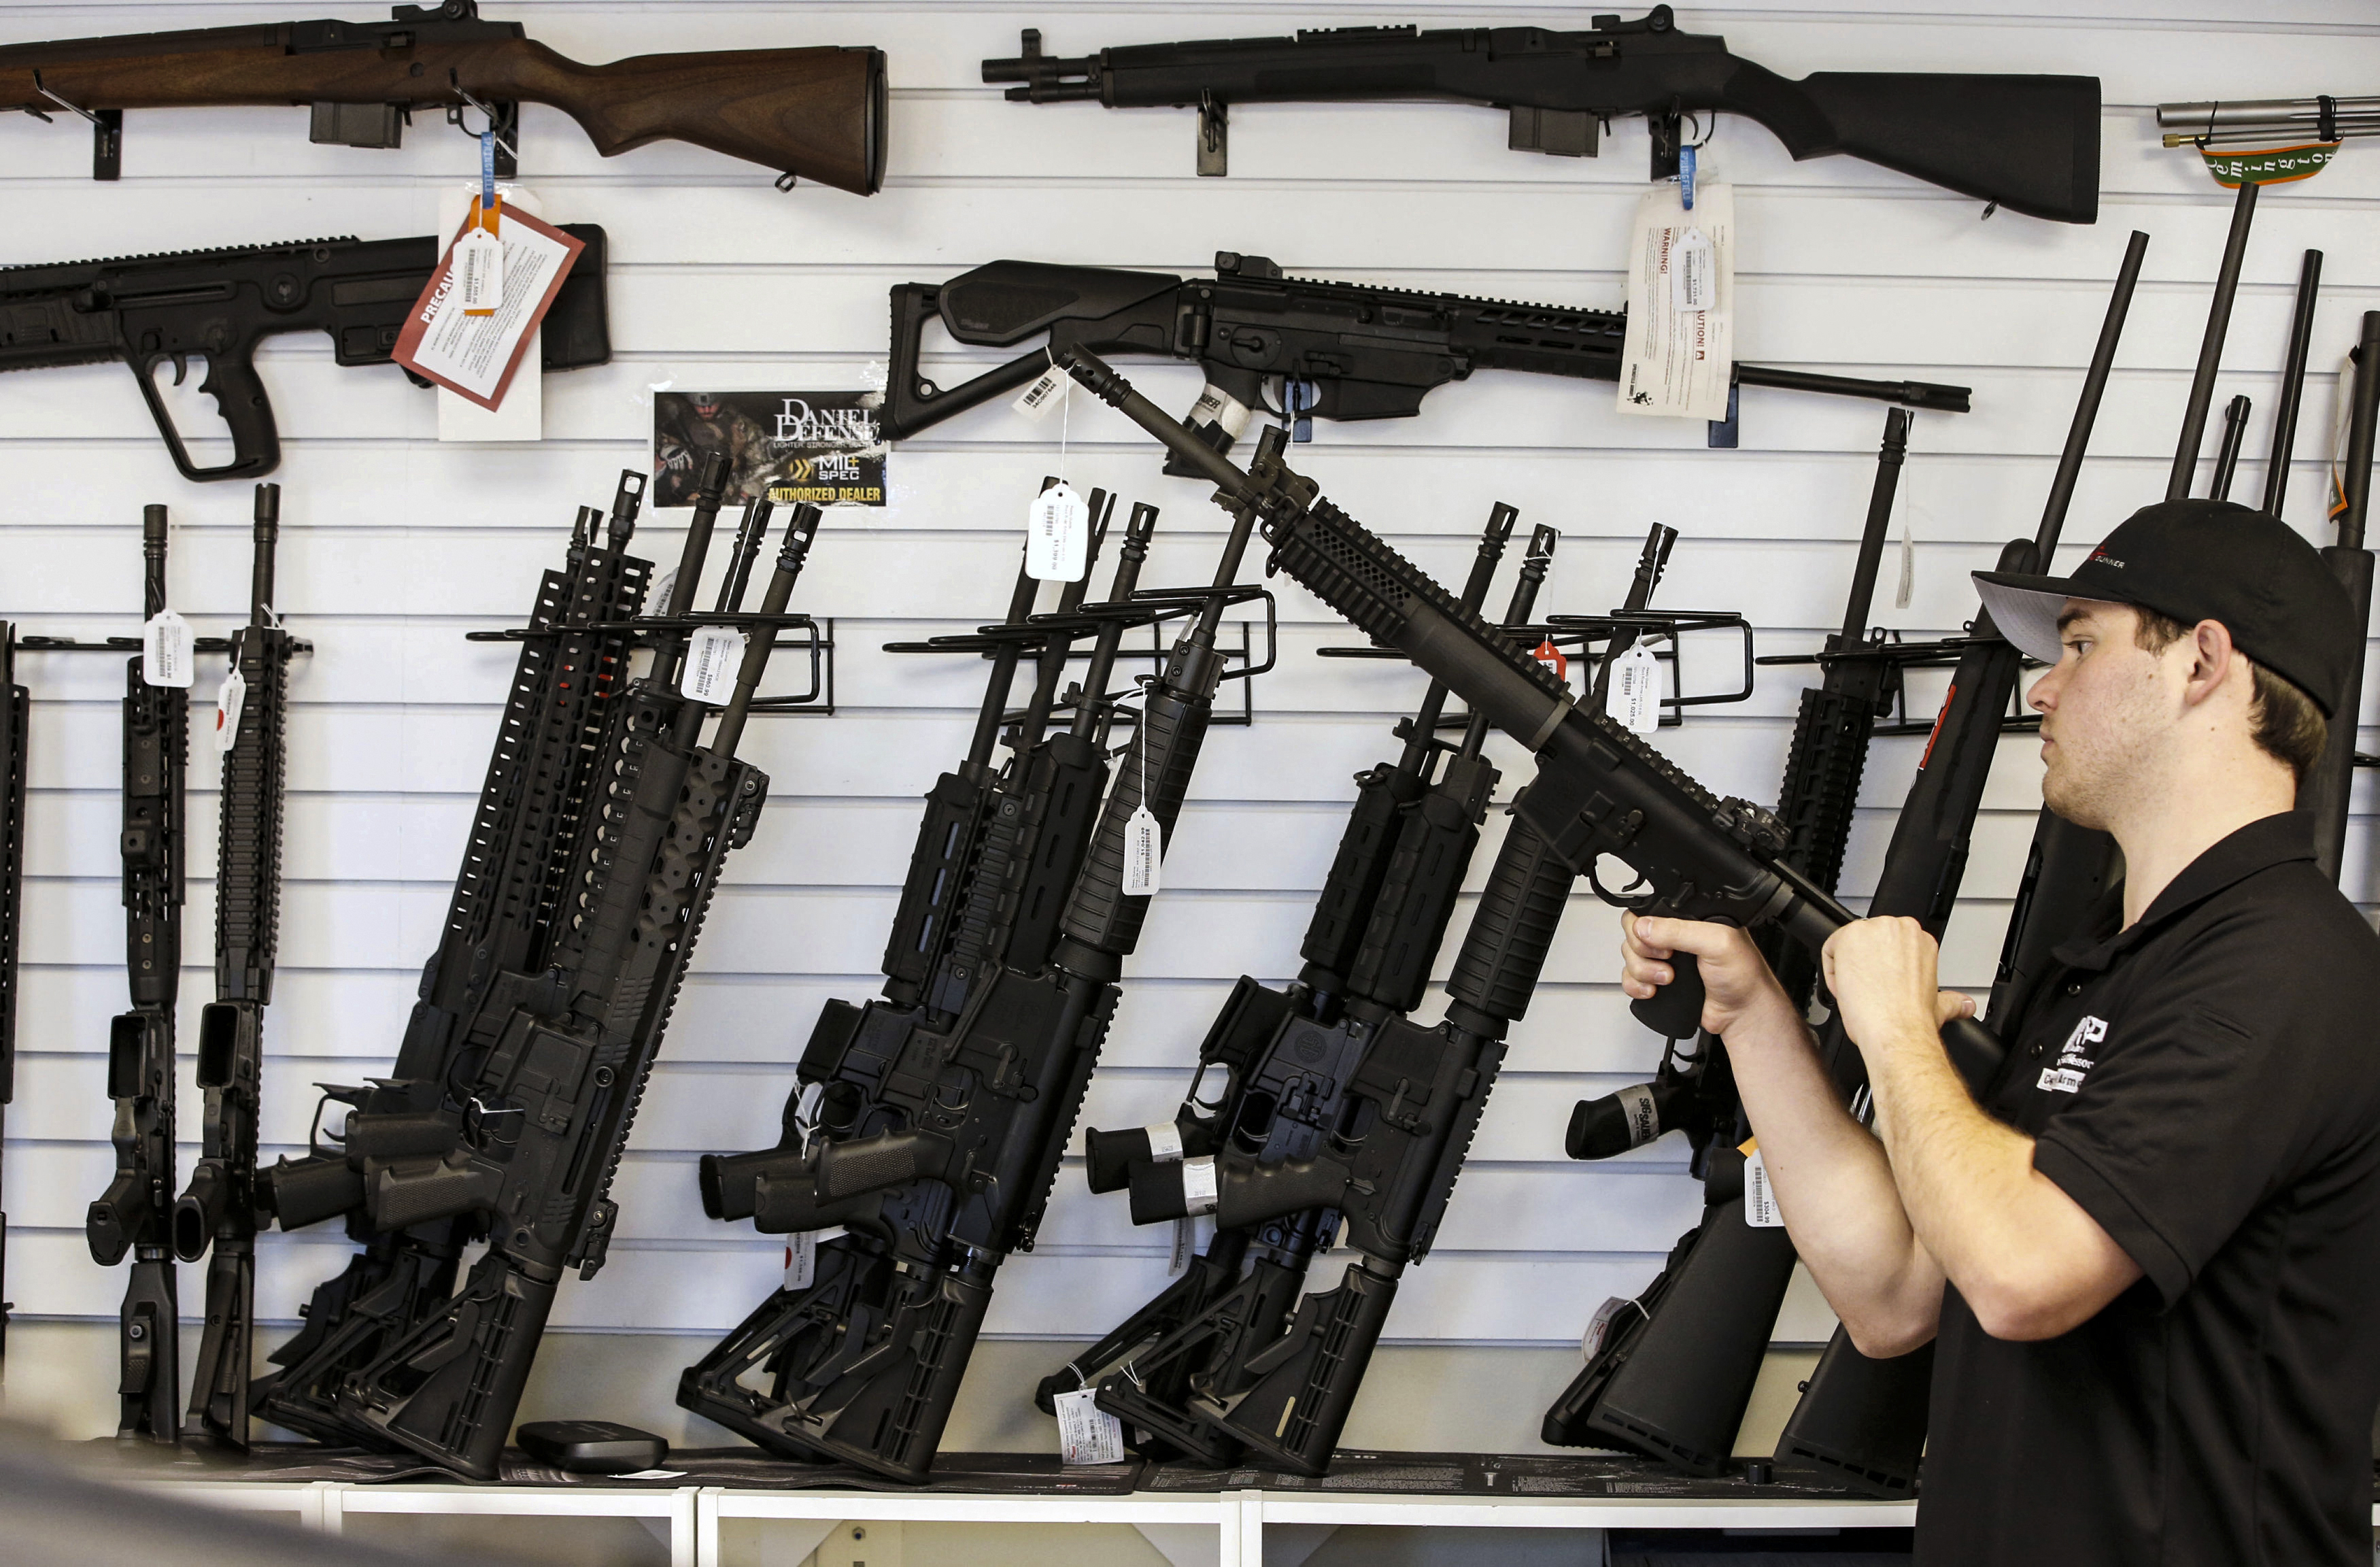 A salesman clears the chamber of an AR-15 at a gun store in Utah.